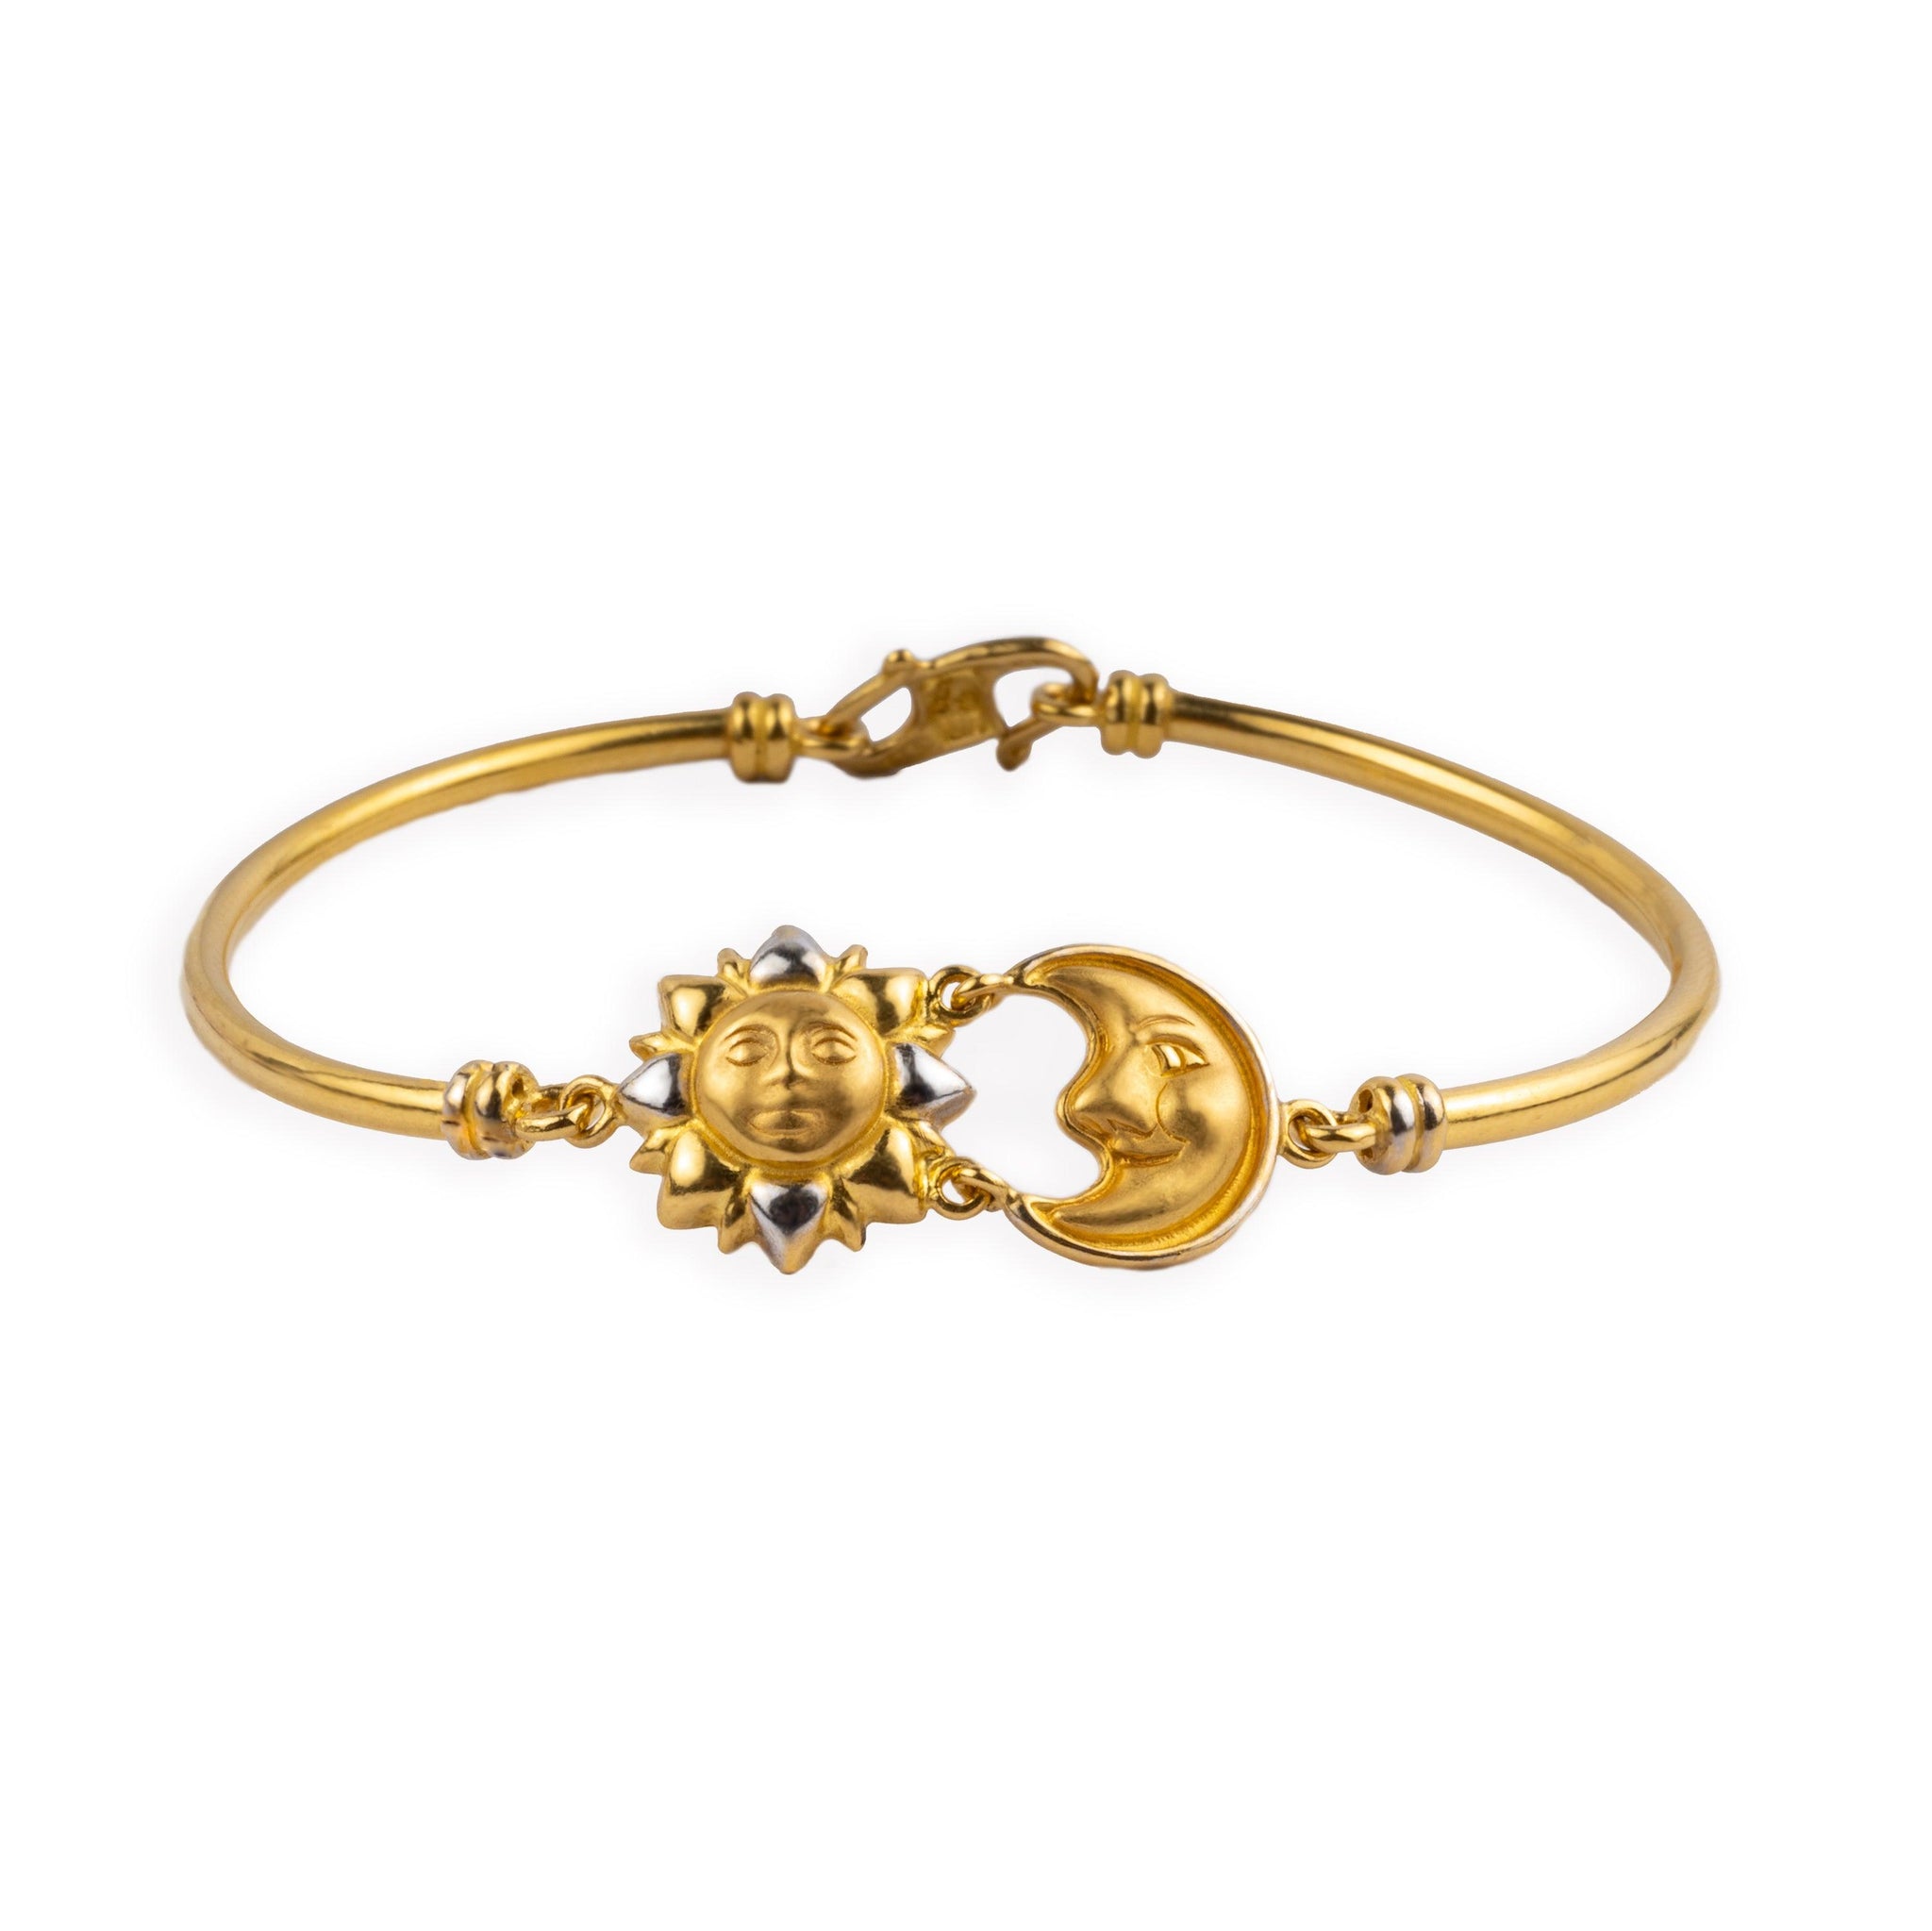 22ct Gold Hand Finished Sun & Moon Children's Bracelet with Rhodium Plating and S Clasp CBR-1389